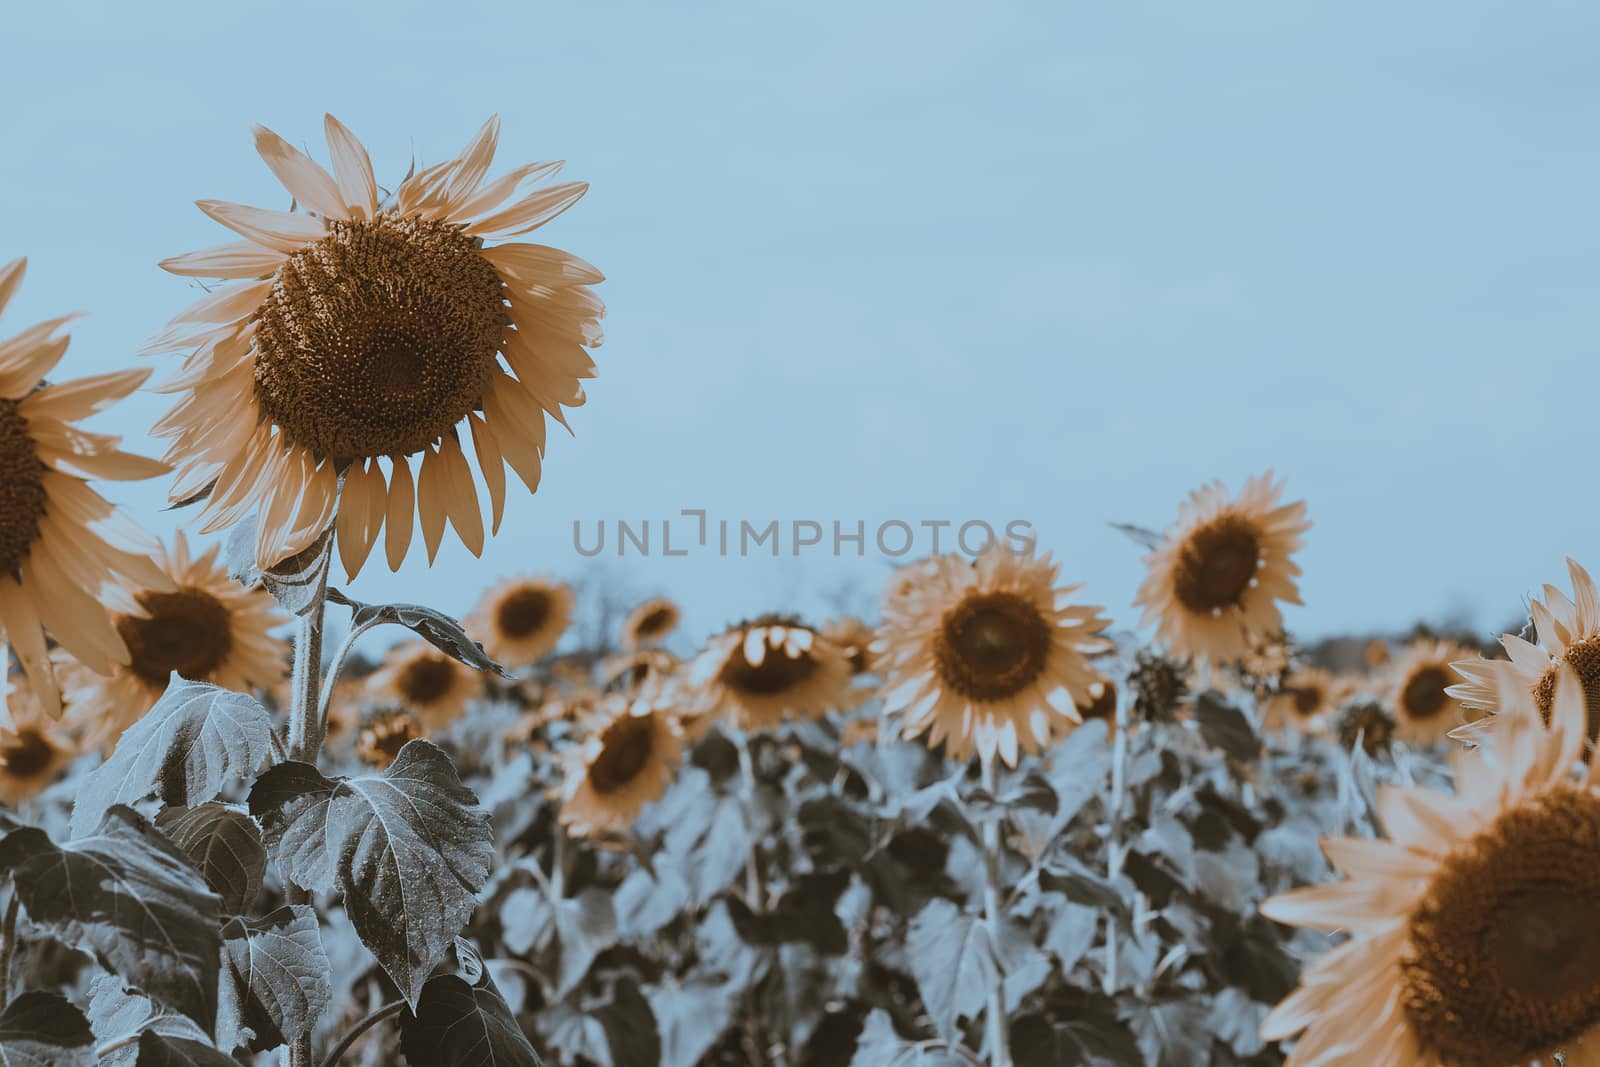 Field of sunflowers with blue sky. A sunflower field at sunset,with vintage filter,selective focus.